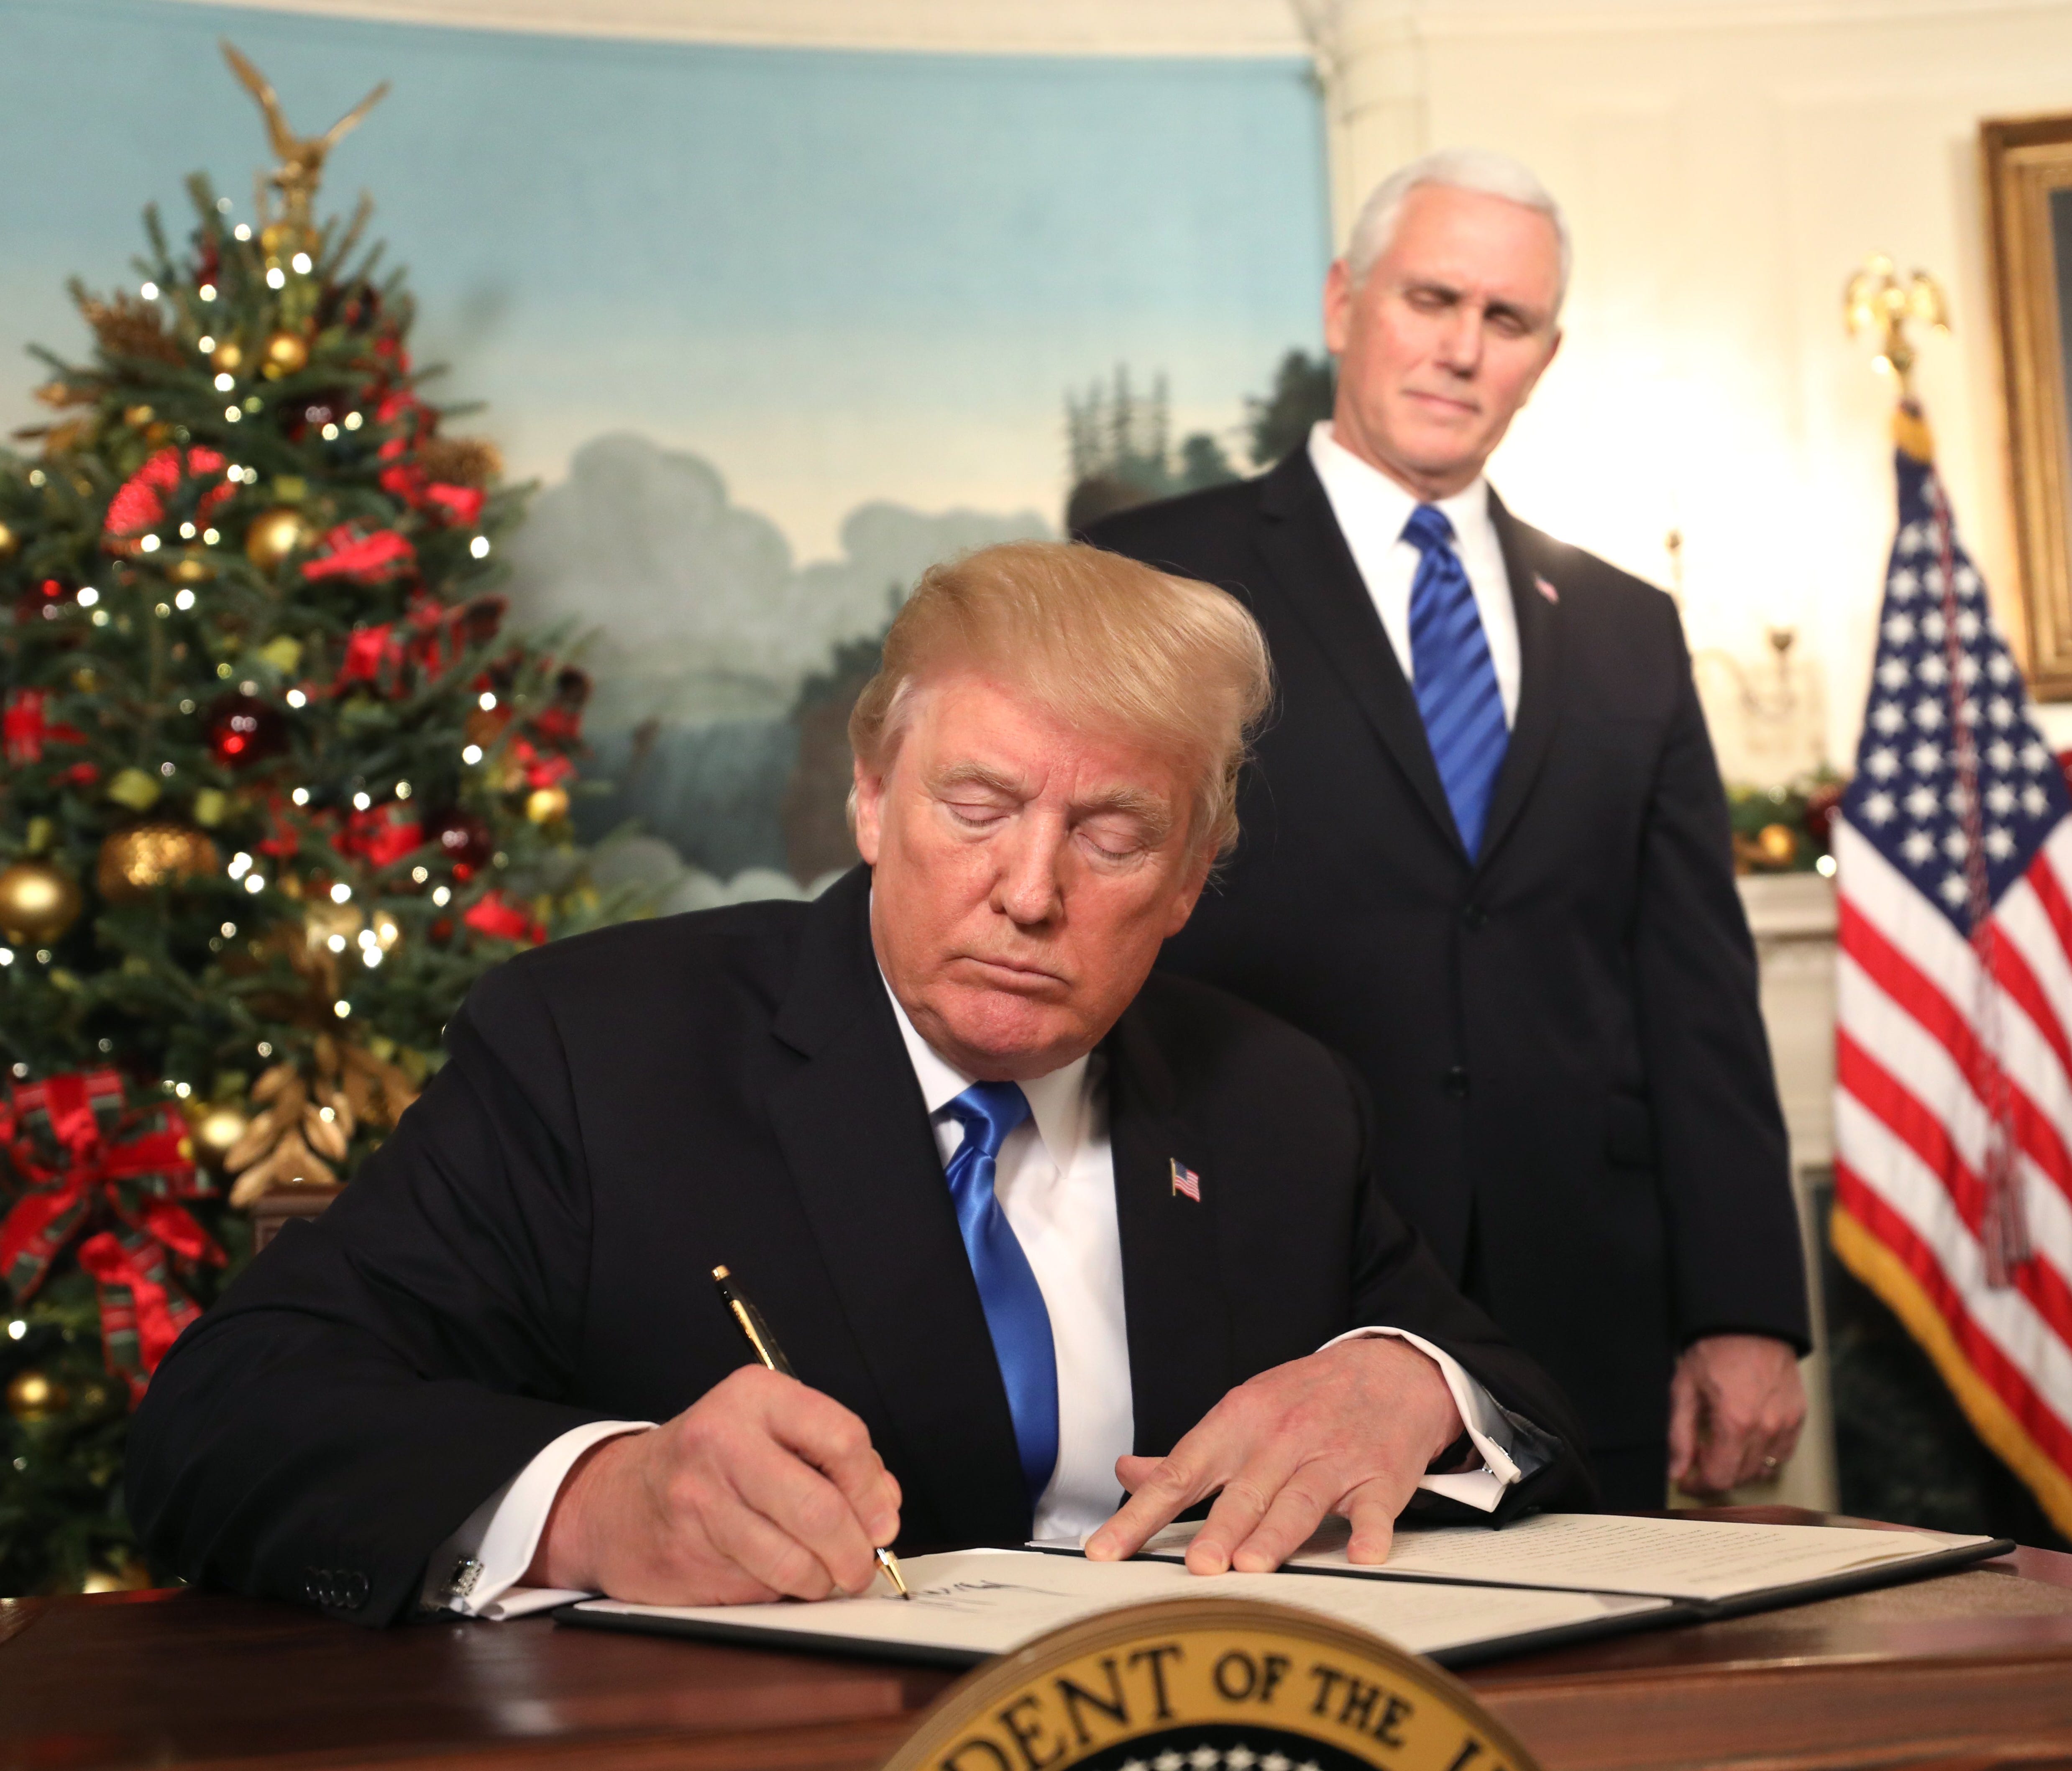 Vice President Pence watches as President Trump sign his proclamation about his decision to recognize Jerusalem as the capital of Israel, and his plan to relocate the U.S. Embassy to that city, in the Diplomatic Room of the White House in Washington,